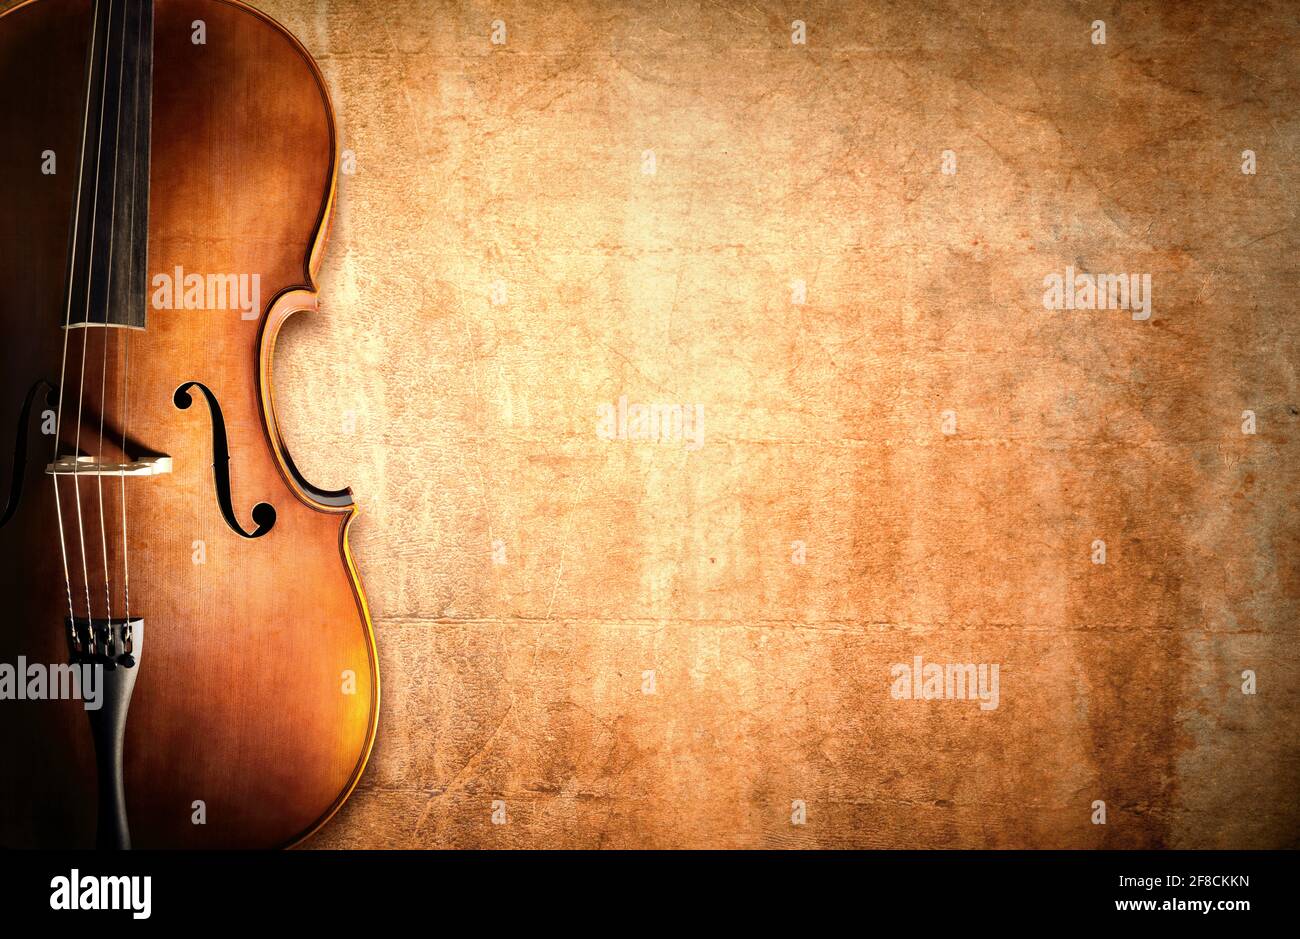 Cello resting against a blank grunge background with copy space Stock Photo